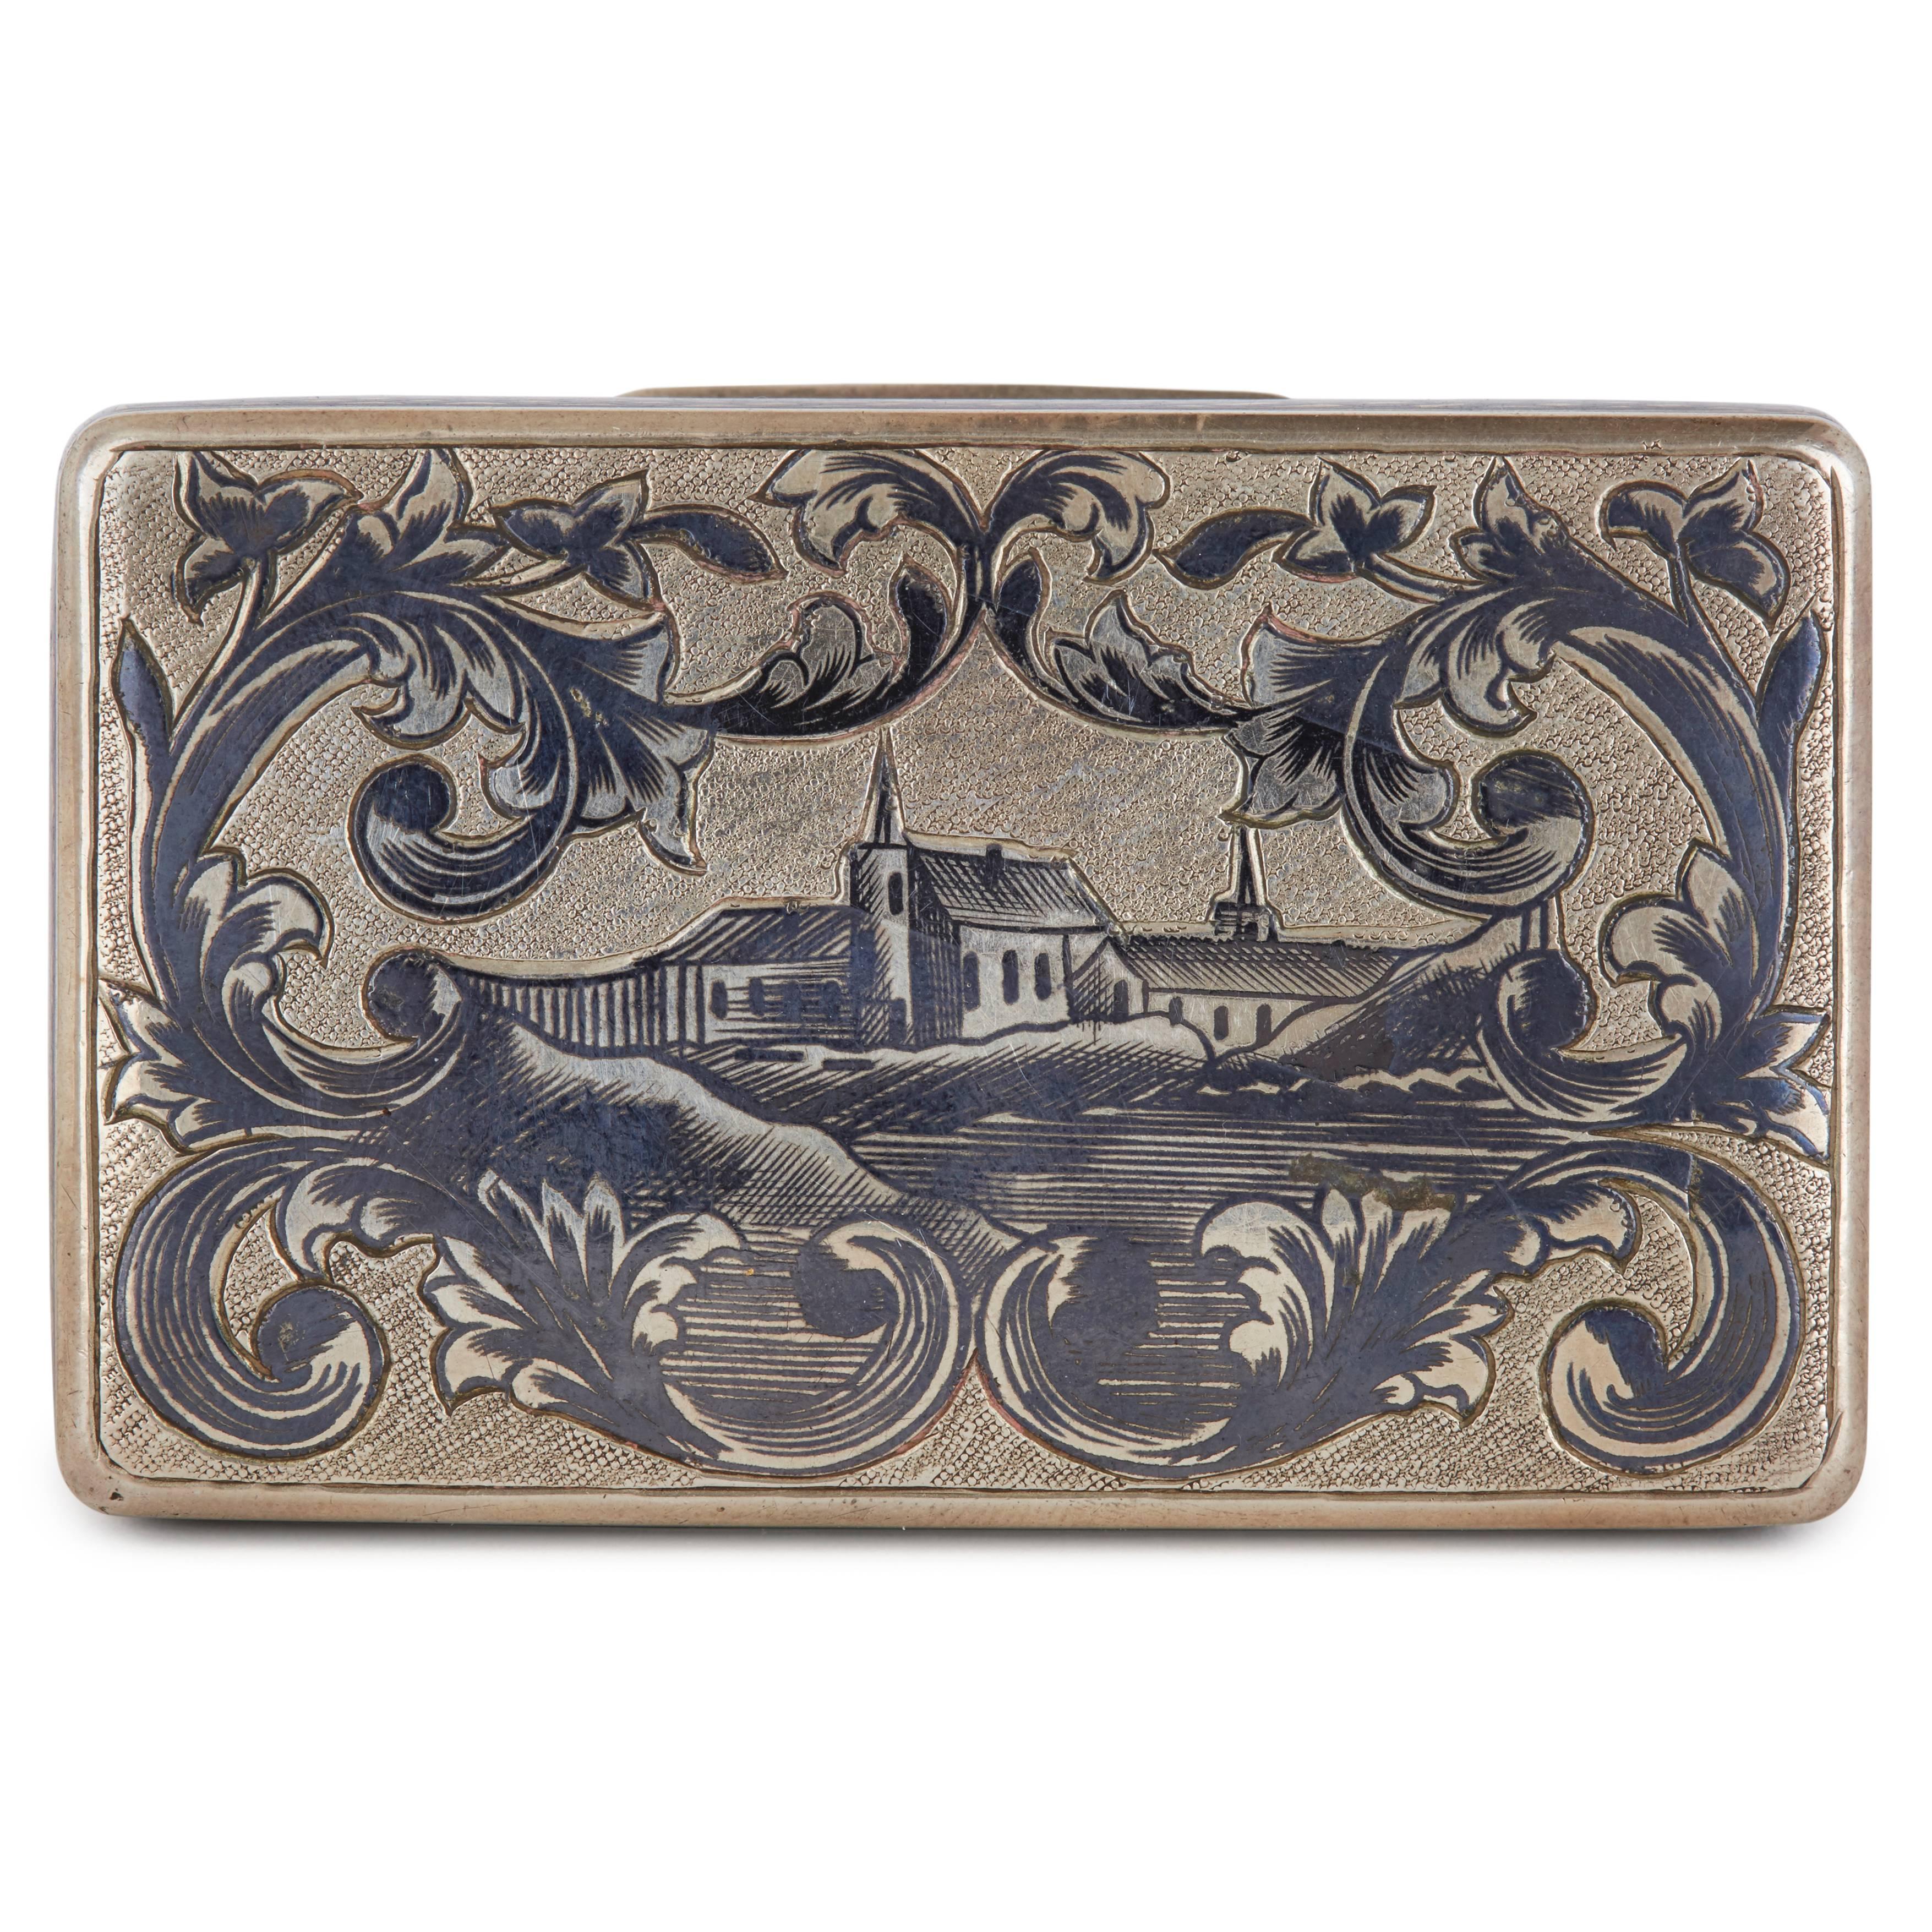 Scene of Russian town surrounded by floral detailing on lid, lozenge design to sides.